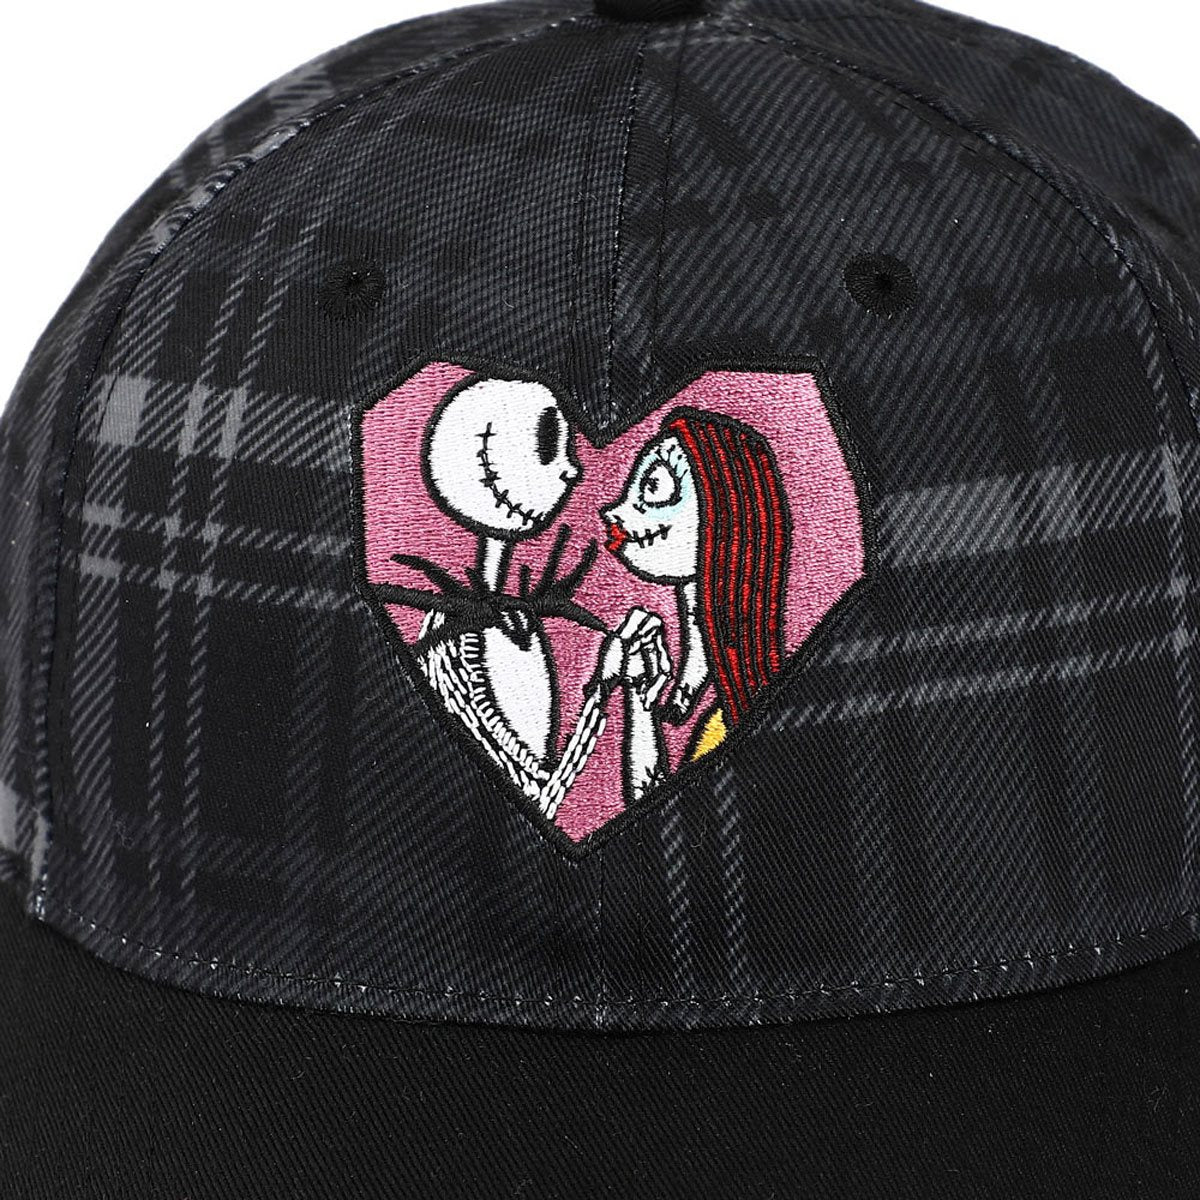 The Nightmare Before Christmas - Jack and Sally Embroidered Hat